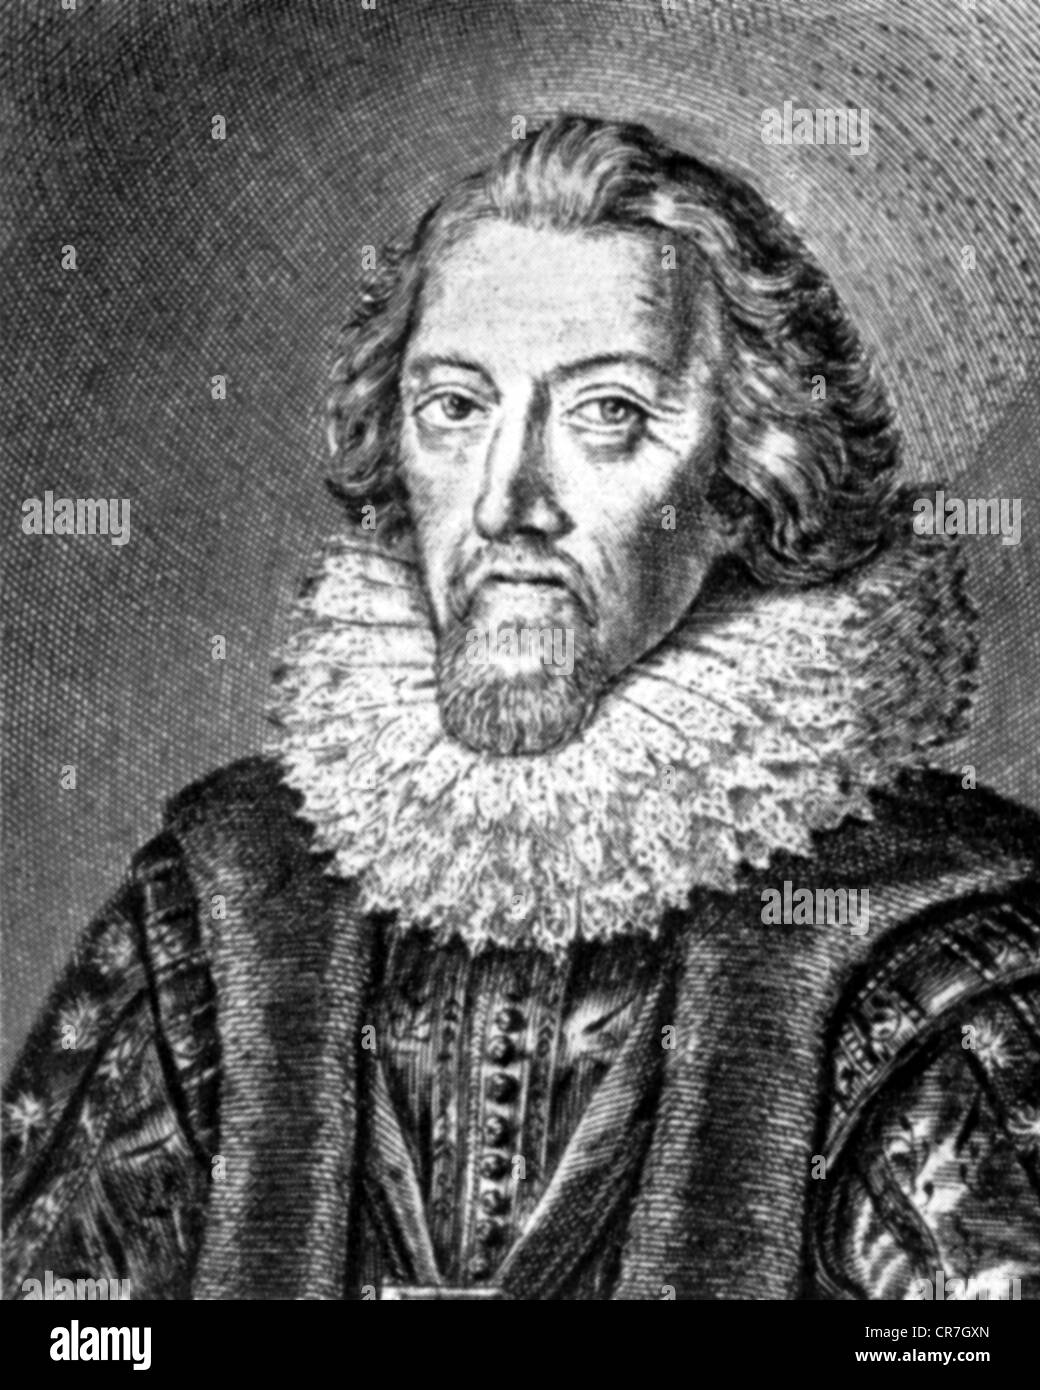 Bacon, Francis, Viscount Saint Alban, 22.1.1561 - 9.4.1626, English philosopher and politician, portrait, wood engraving, 19th century, Stock Photo